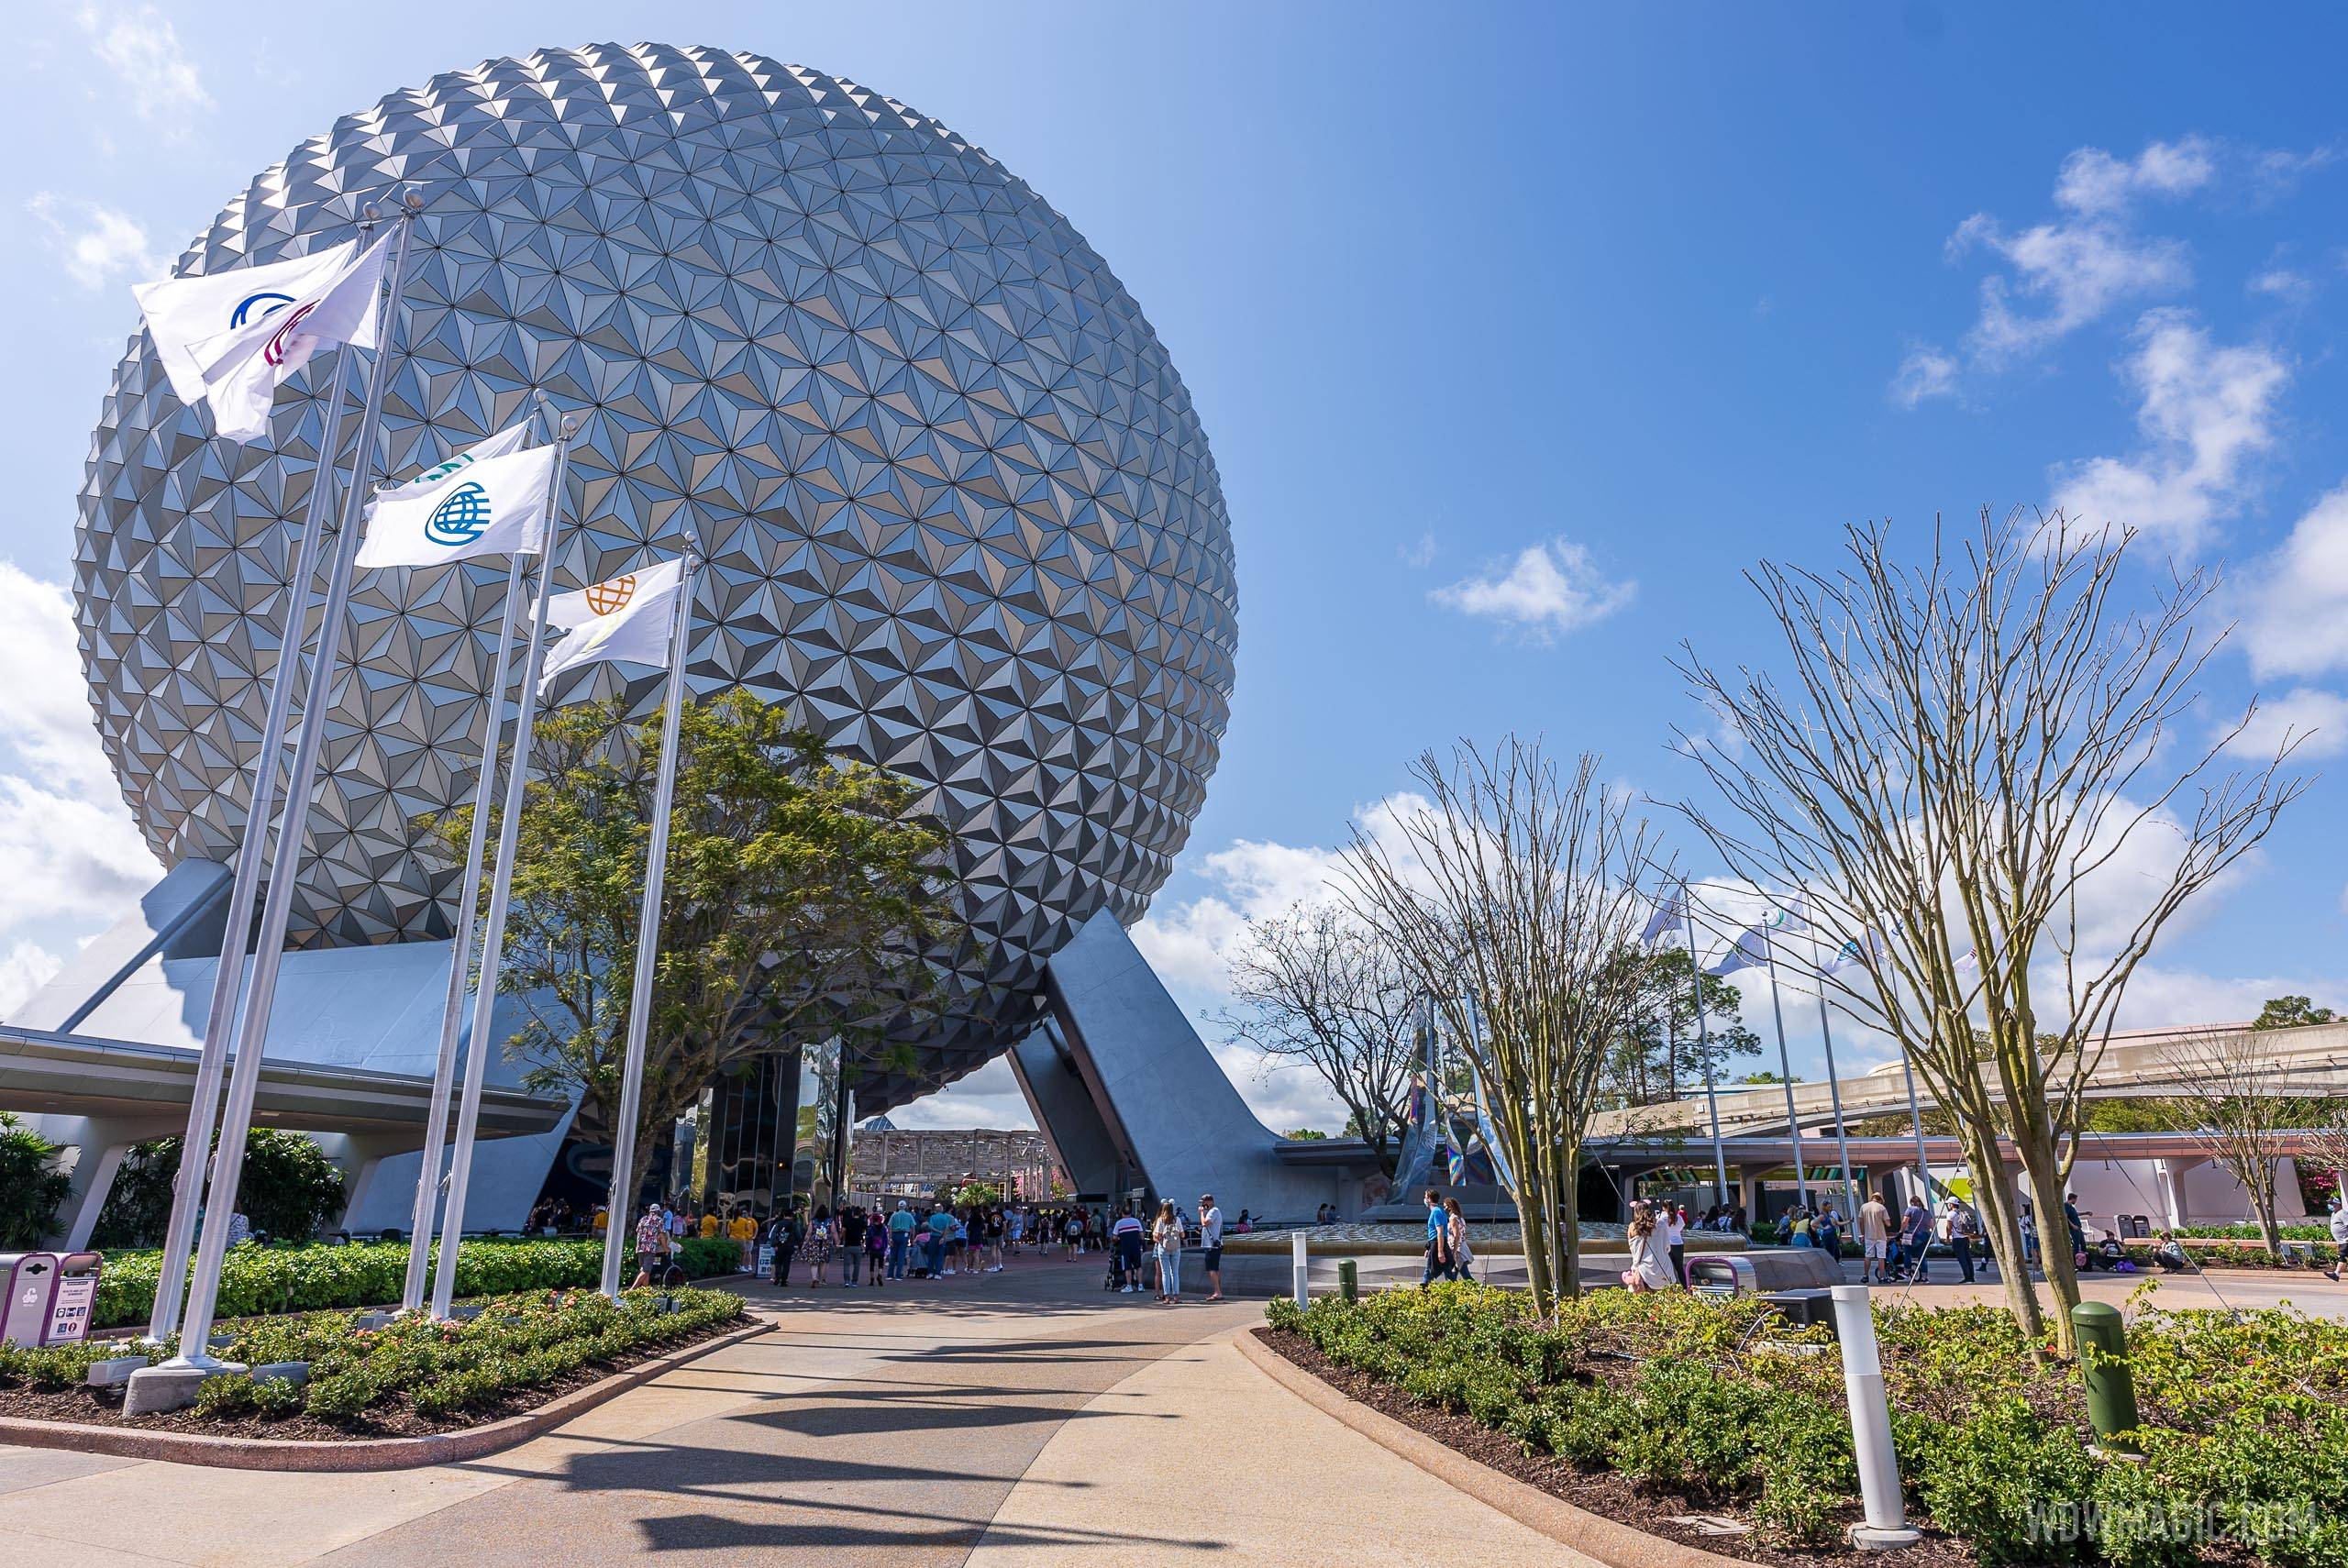 EPCOT hours have been extended to 10pm close through July 10